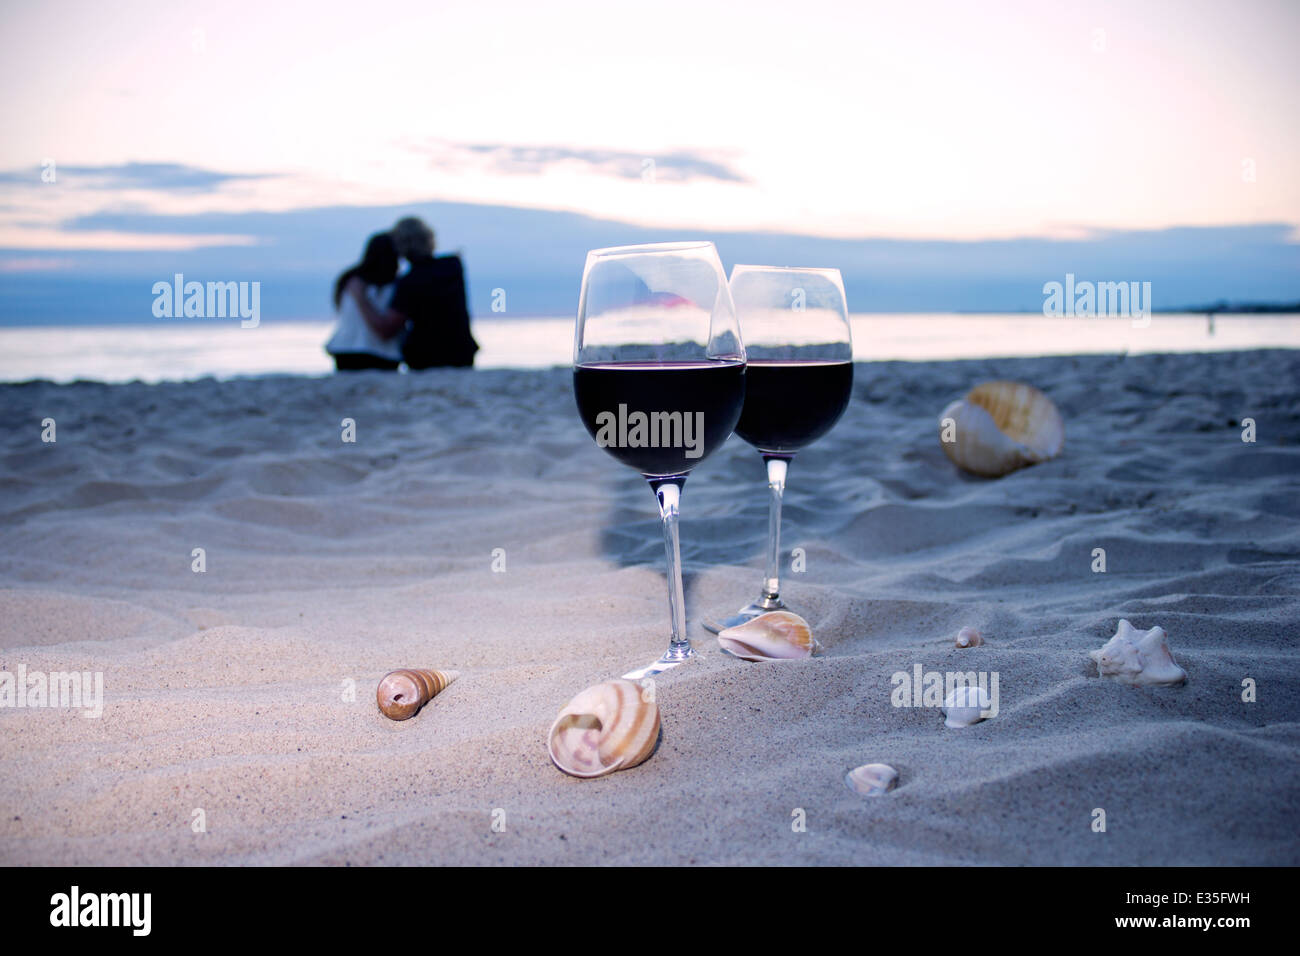 https://c8.alamy.com/comp/E35FWH/romantic-beach-evening-on-the-sunset-two-glasses-of-wine-candles-shells-E35FWH.jpg